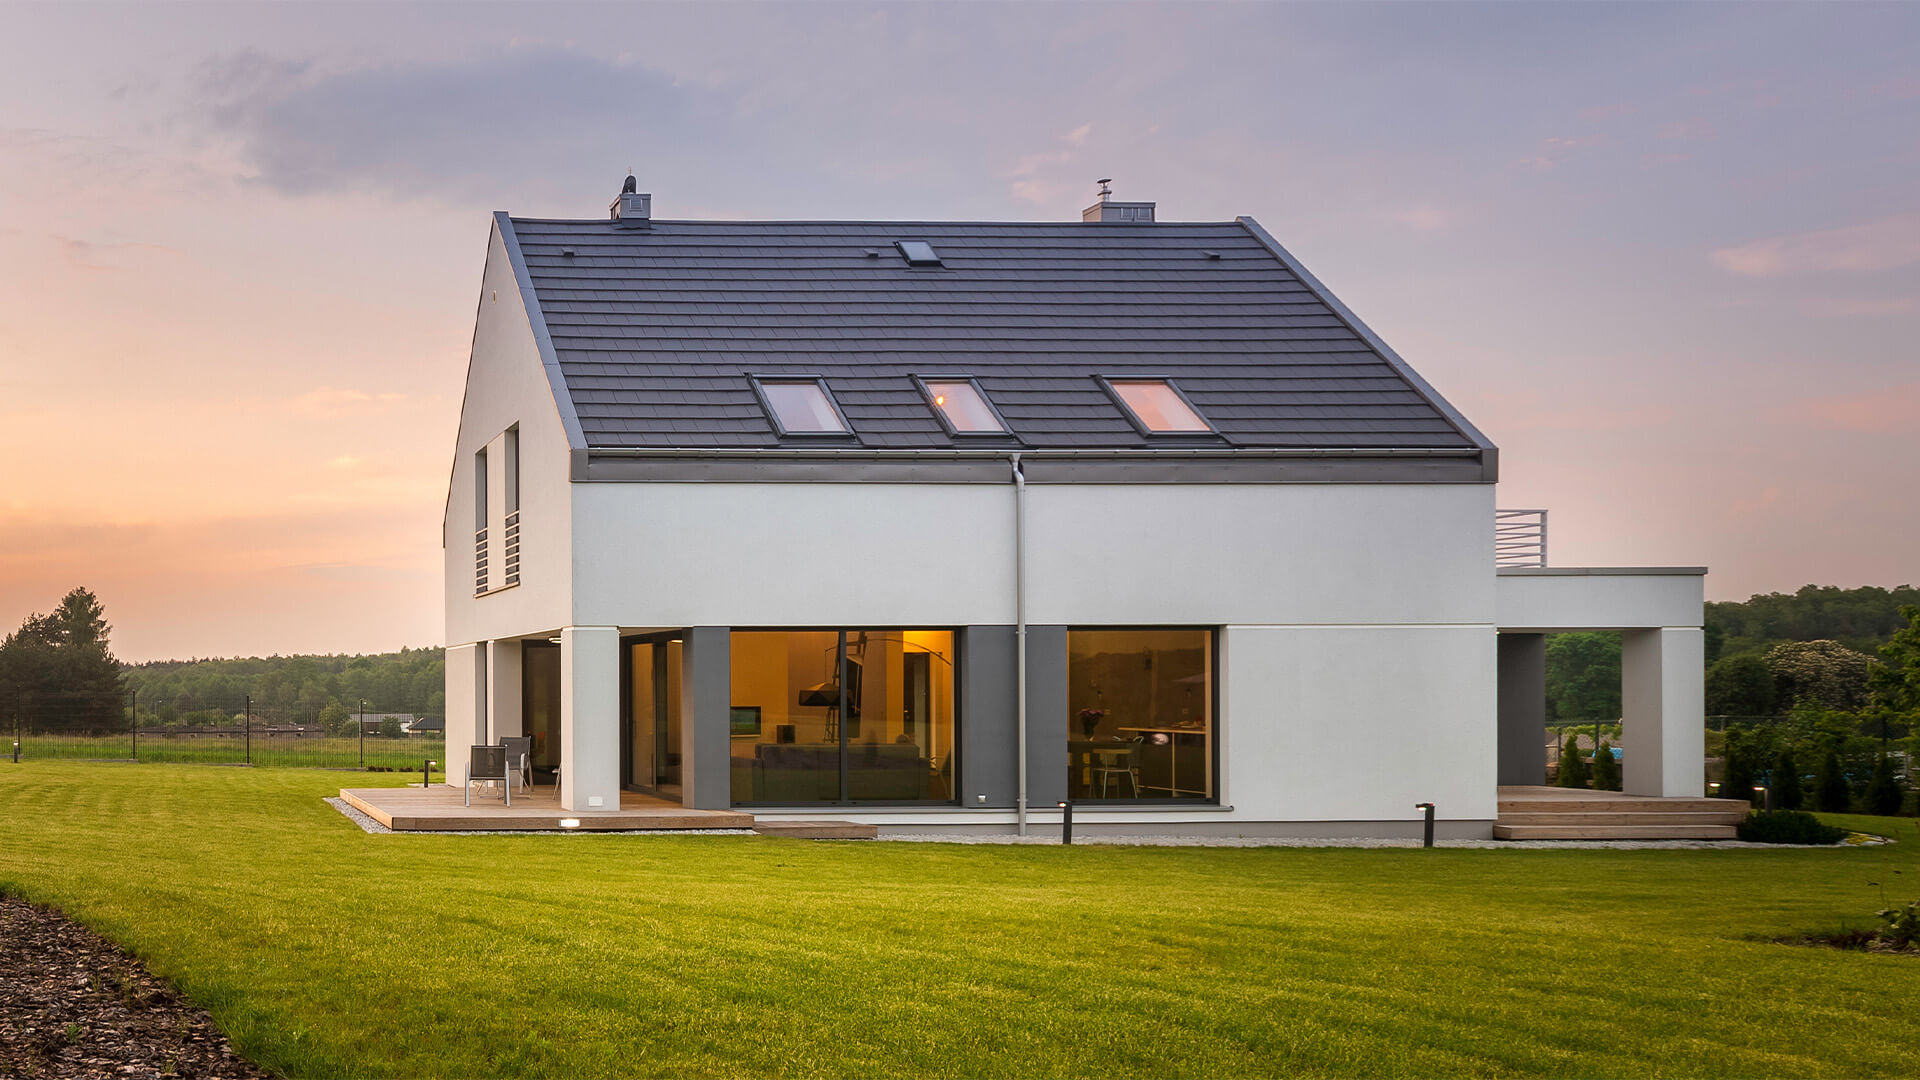 Modern kit home in the countryside at sunset